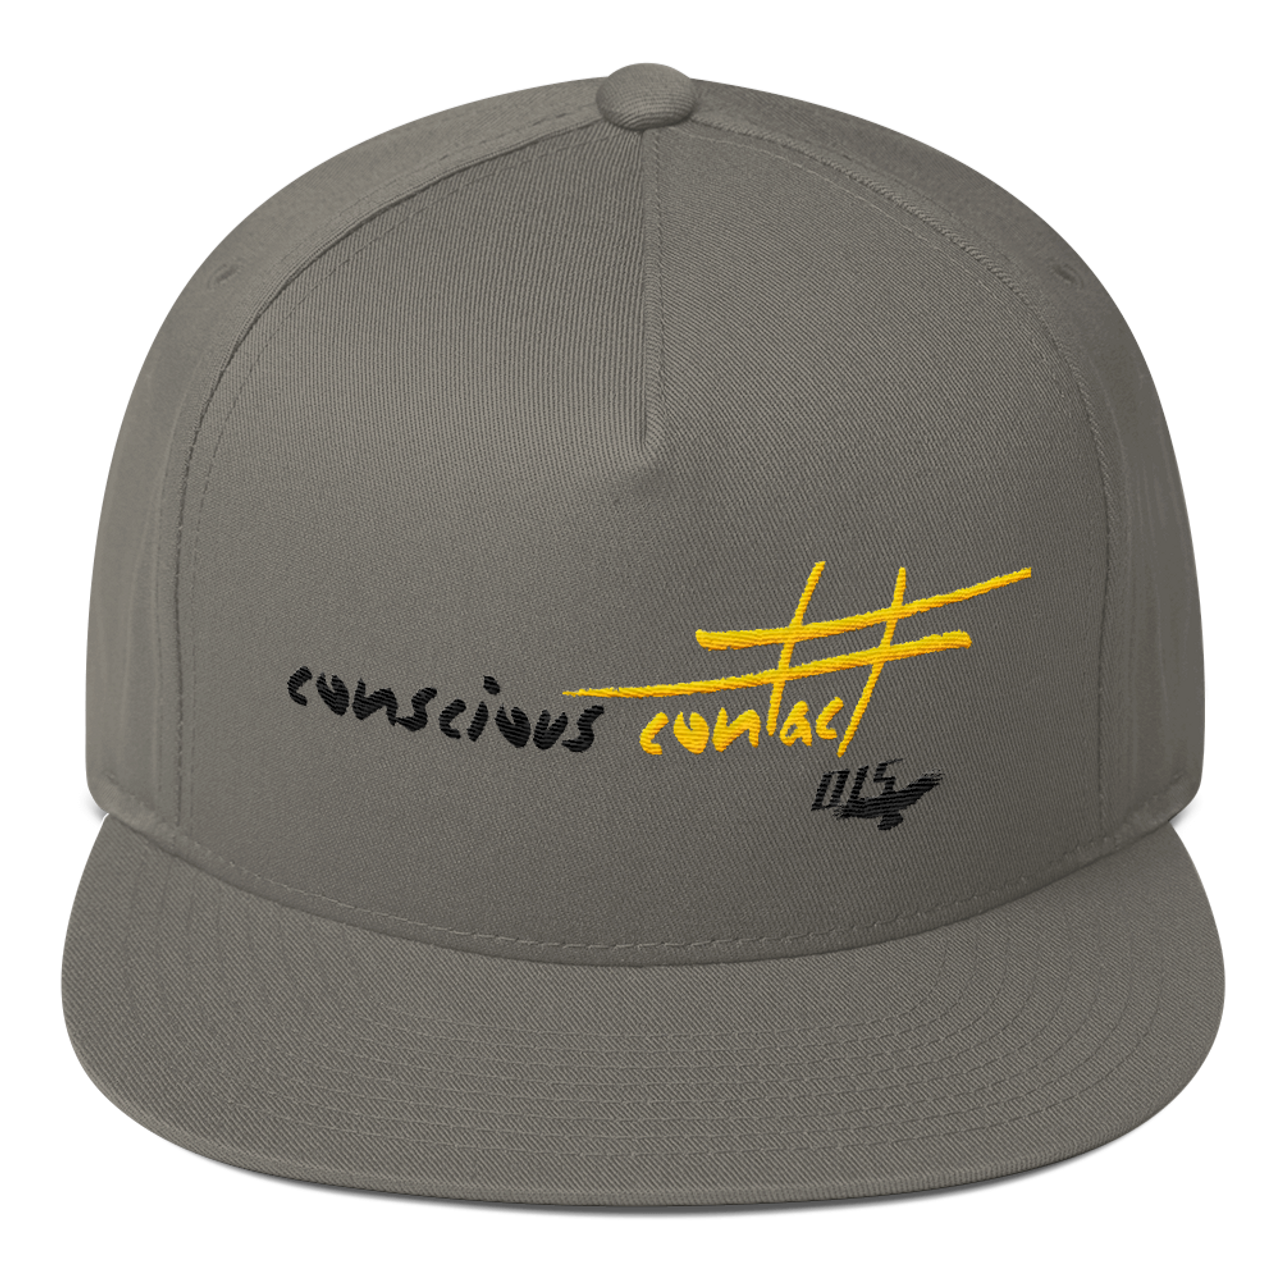 Download "Conscious Contact" 5 Panel Black Embroidered Baseball Hat - Doing It Sober